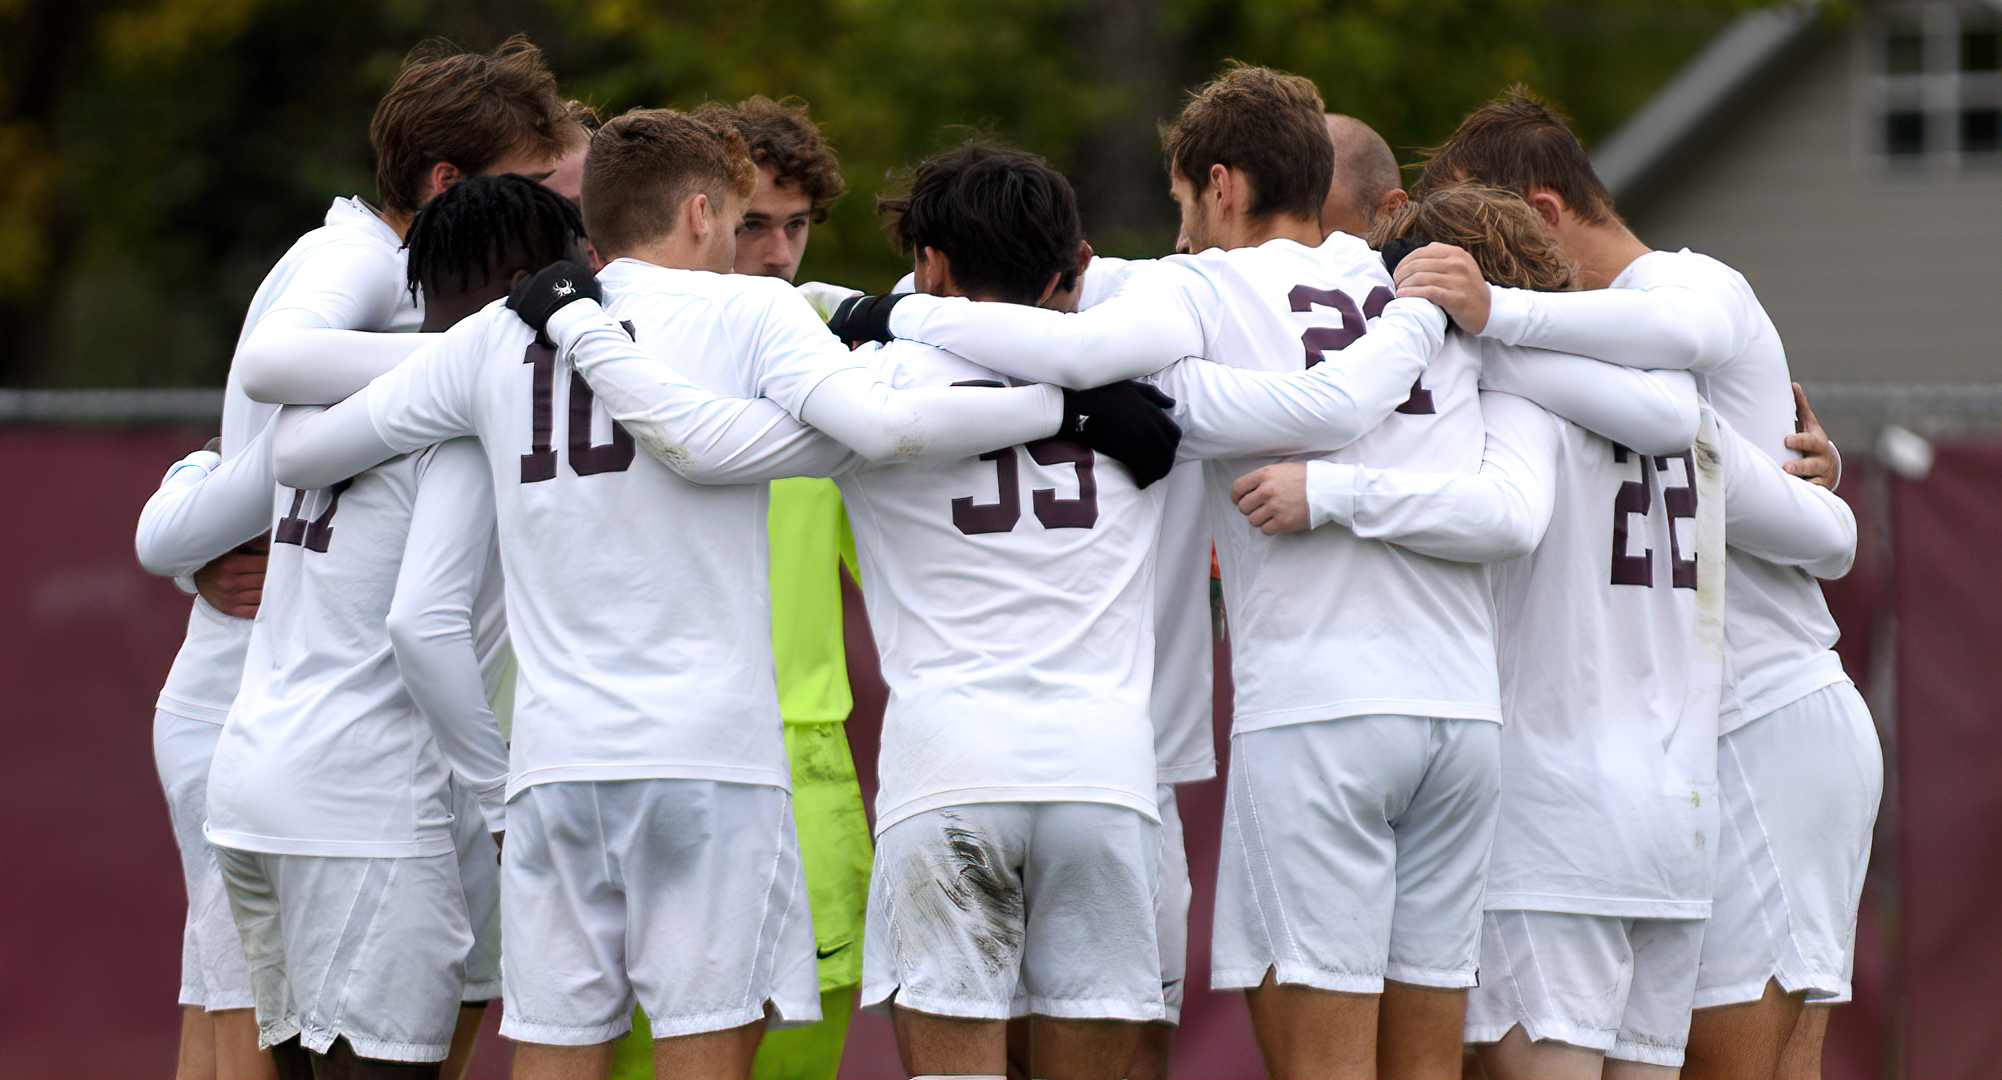 Concordia gave up three goals in each half and lost 6-0 at home to Gustavus.